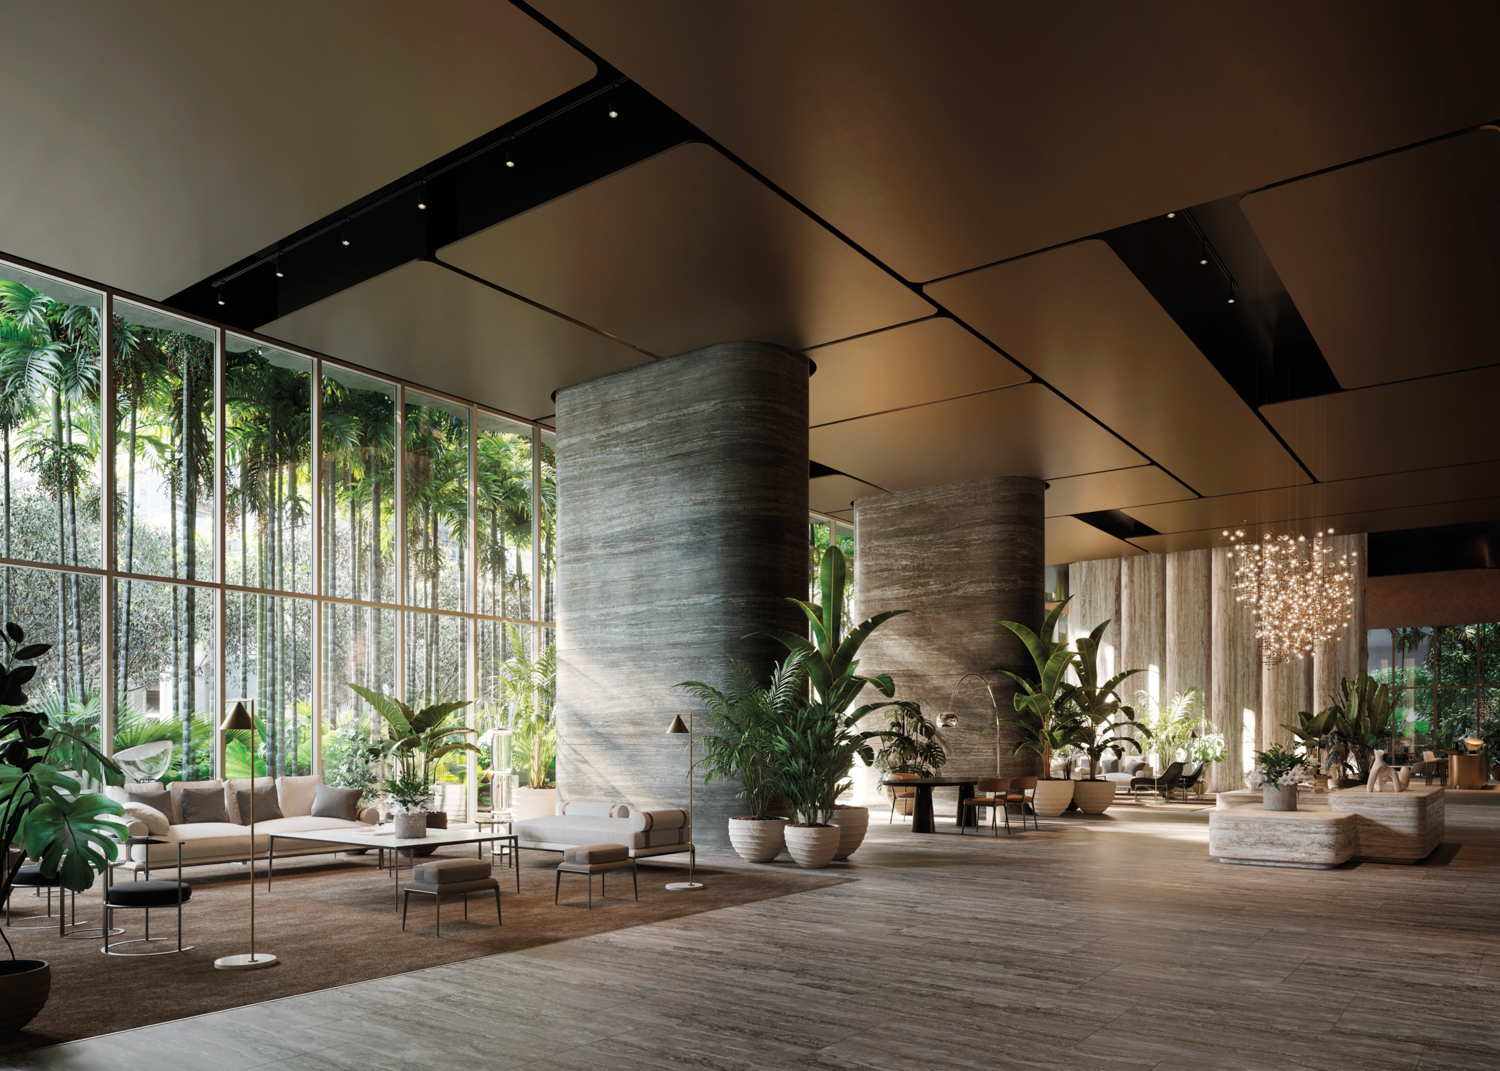 South Florida lobby with potted greenery around different seating areas with floor-to-ceiling windows